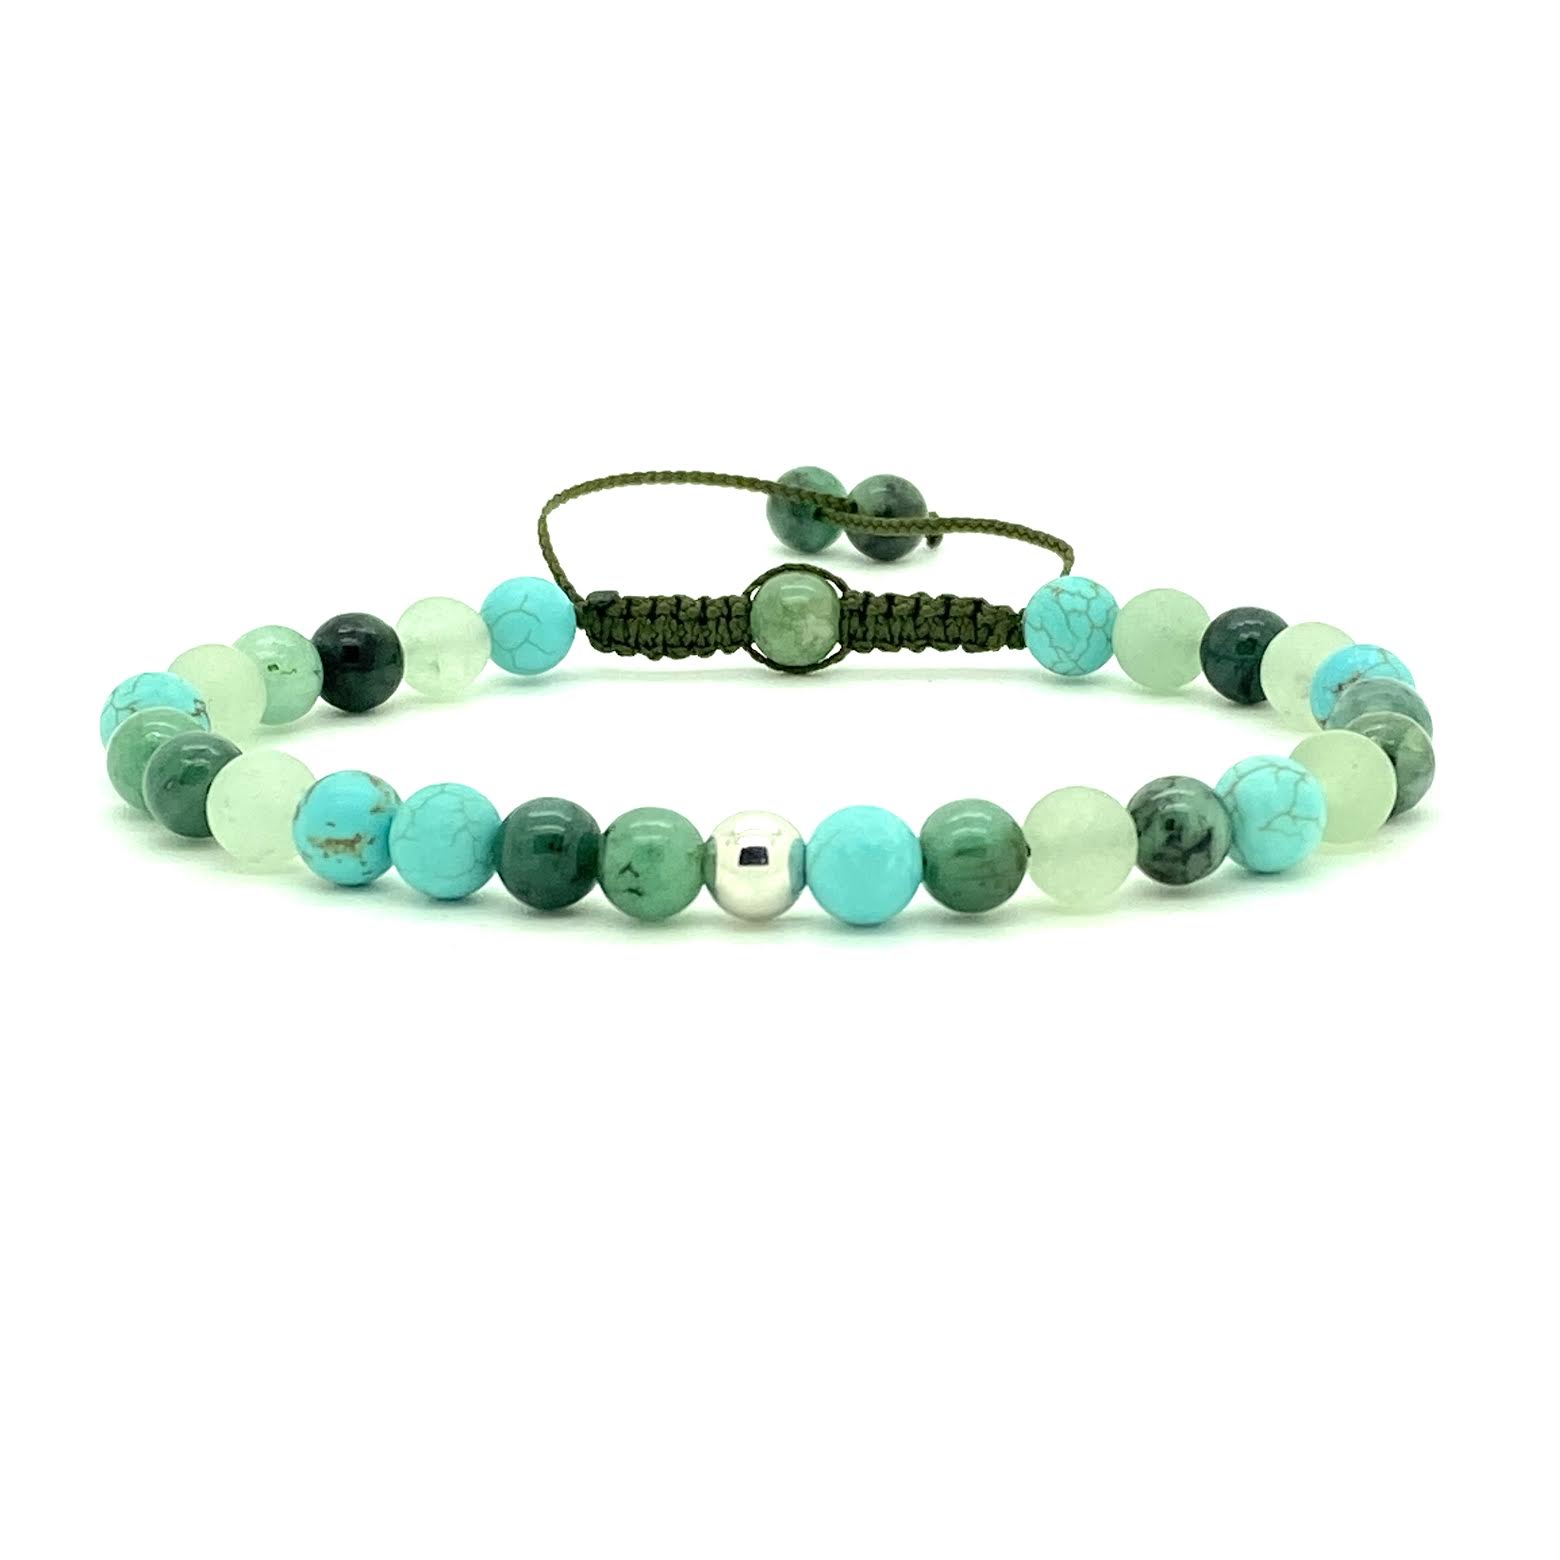 A mixture of Aqua Emeralds, these beads strengthen your connection to the divine energies by opening your heart and mind. These smooth blue variety beads are accented with a choice of a solid 14K white, yellow or rose gold bead. Hand knotted adjustable cord for a perfect fit. Made by WristBend